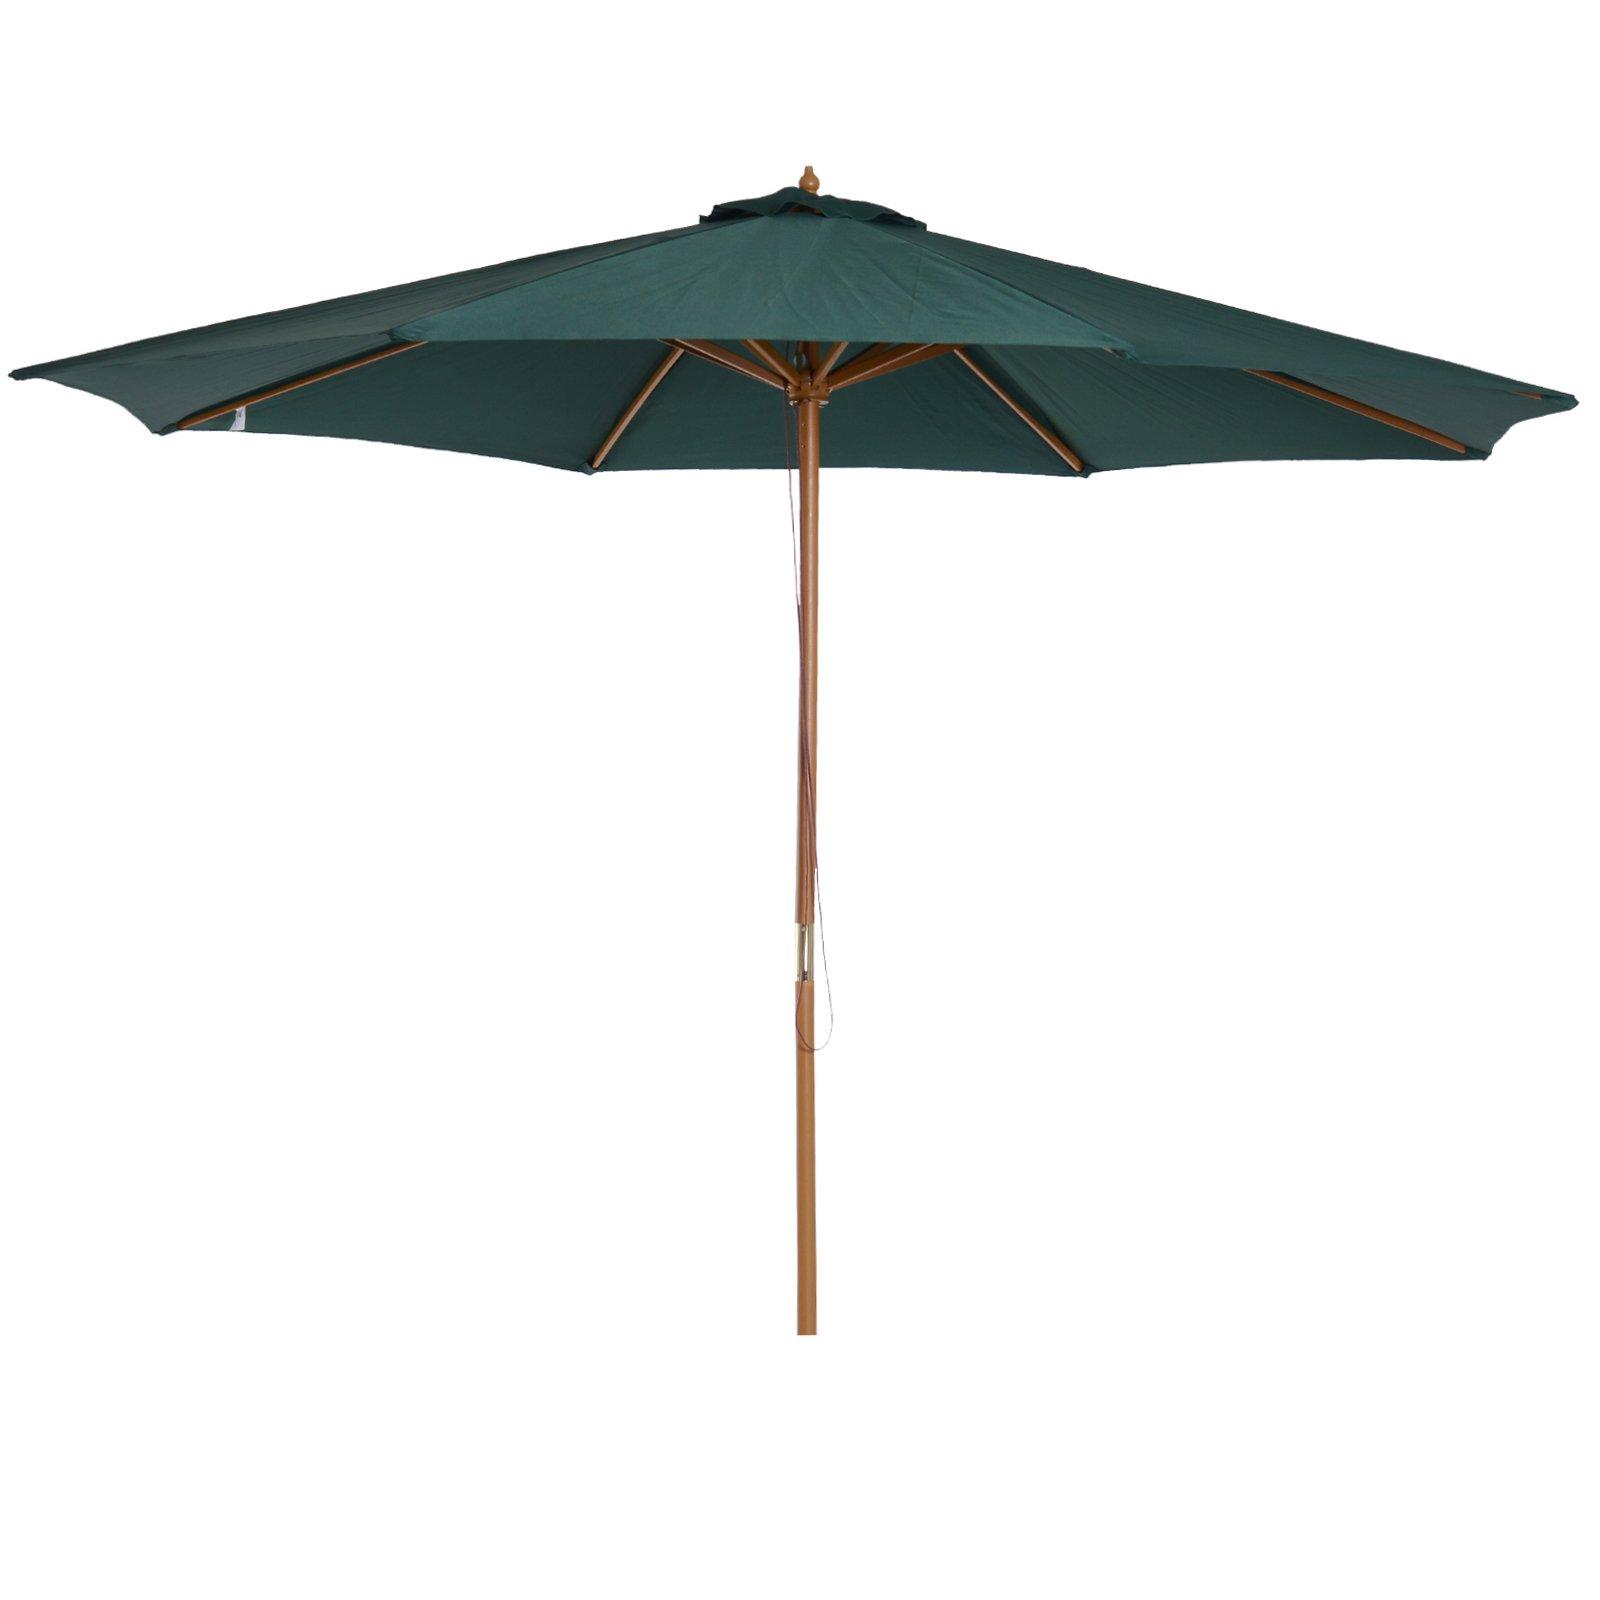 Wooden Garden Parasol with Rope Pulley Mechanism and 8 Ribs